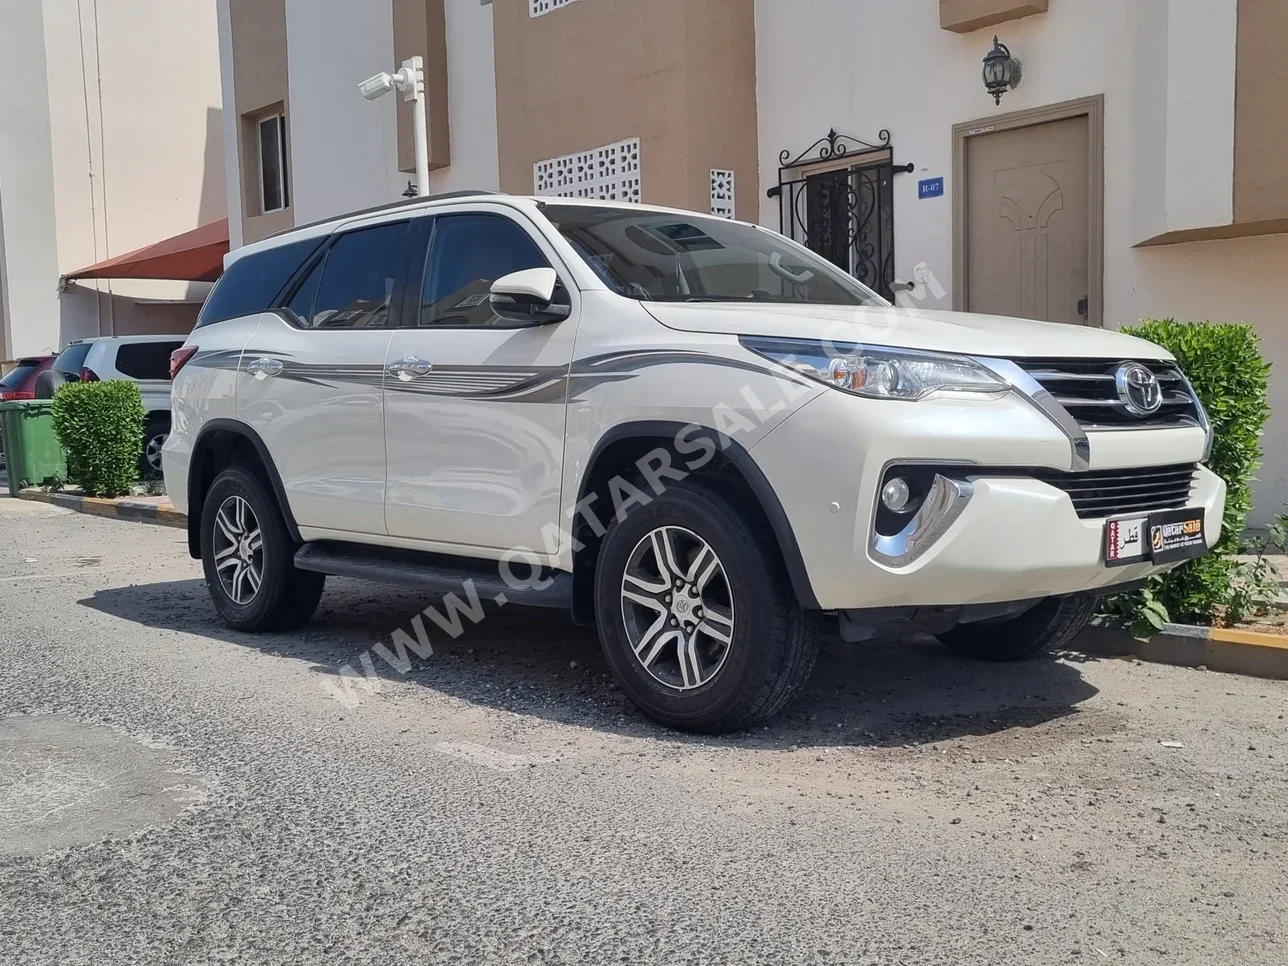 Toyota  Fortuner  2018  Automatic  96,000 Km  4 Cylinder  Four Wheel Drive (4WD)  SUV  White